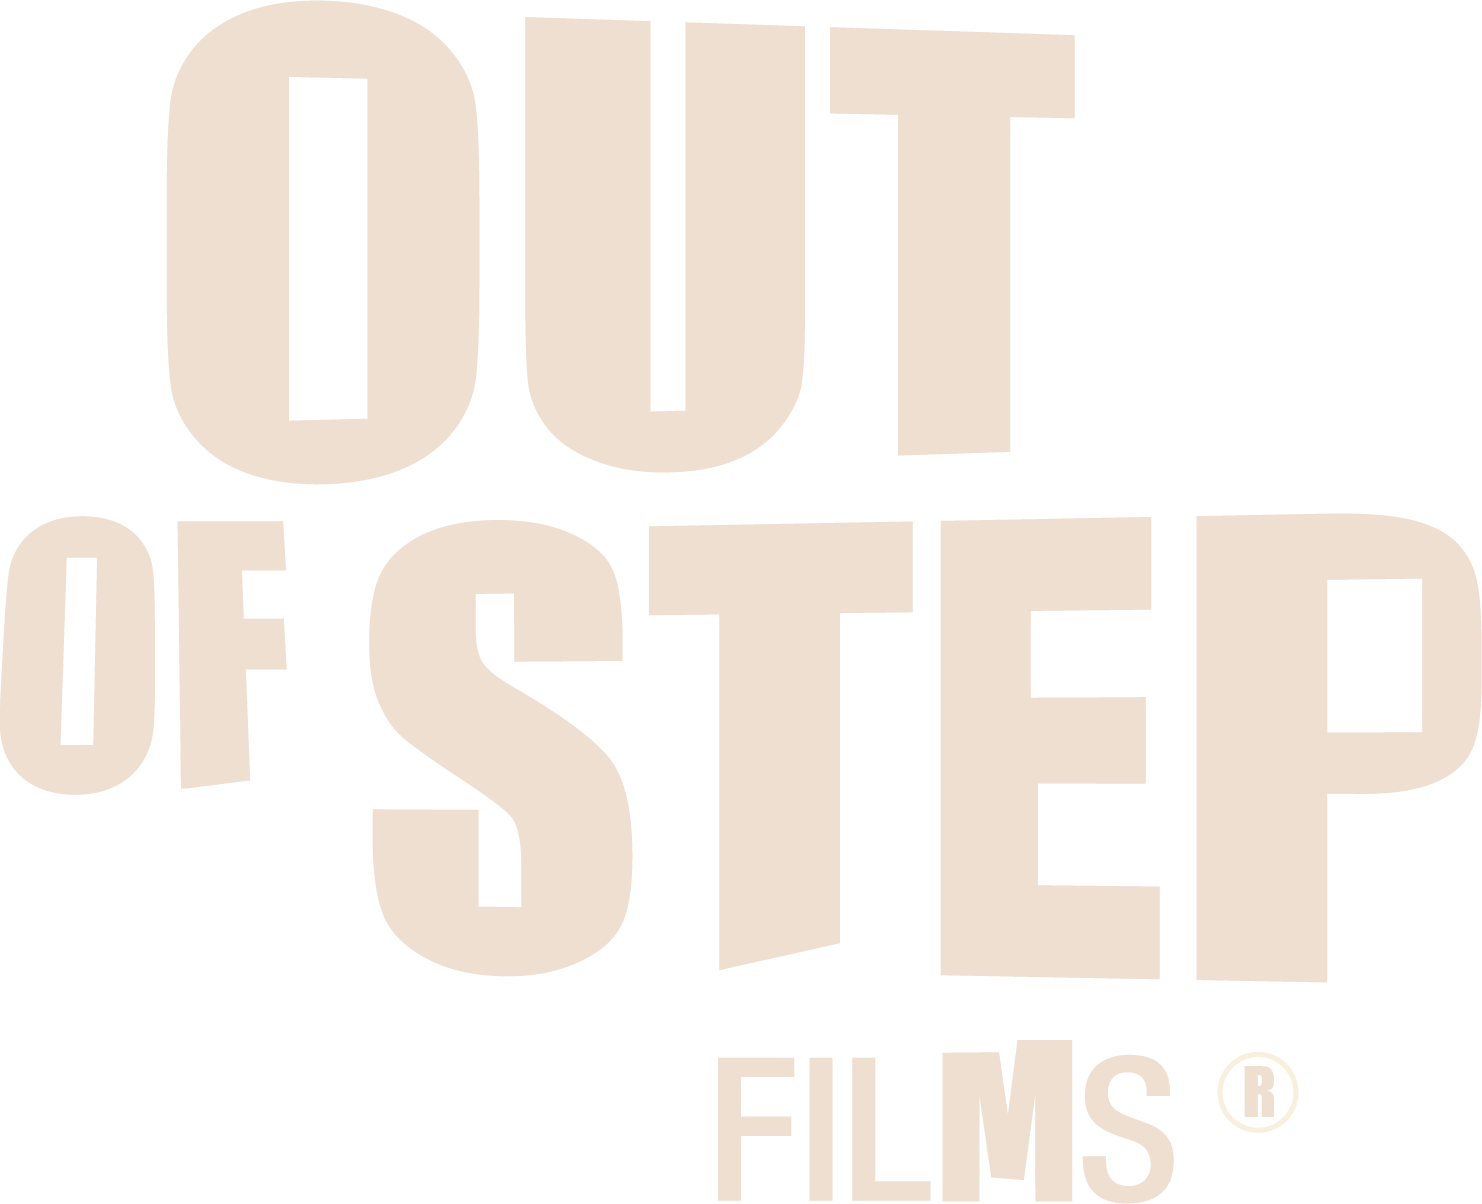 Out of Step Films